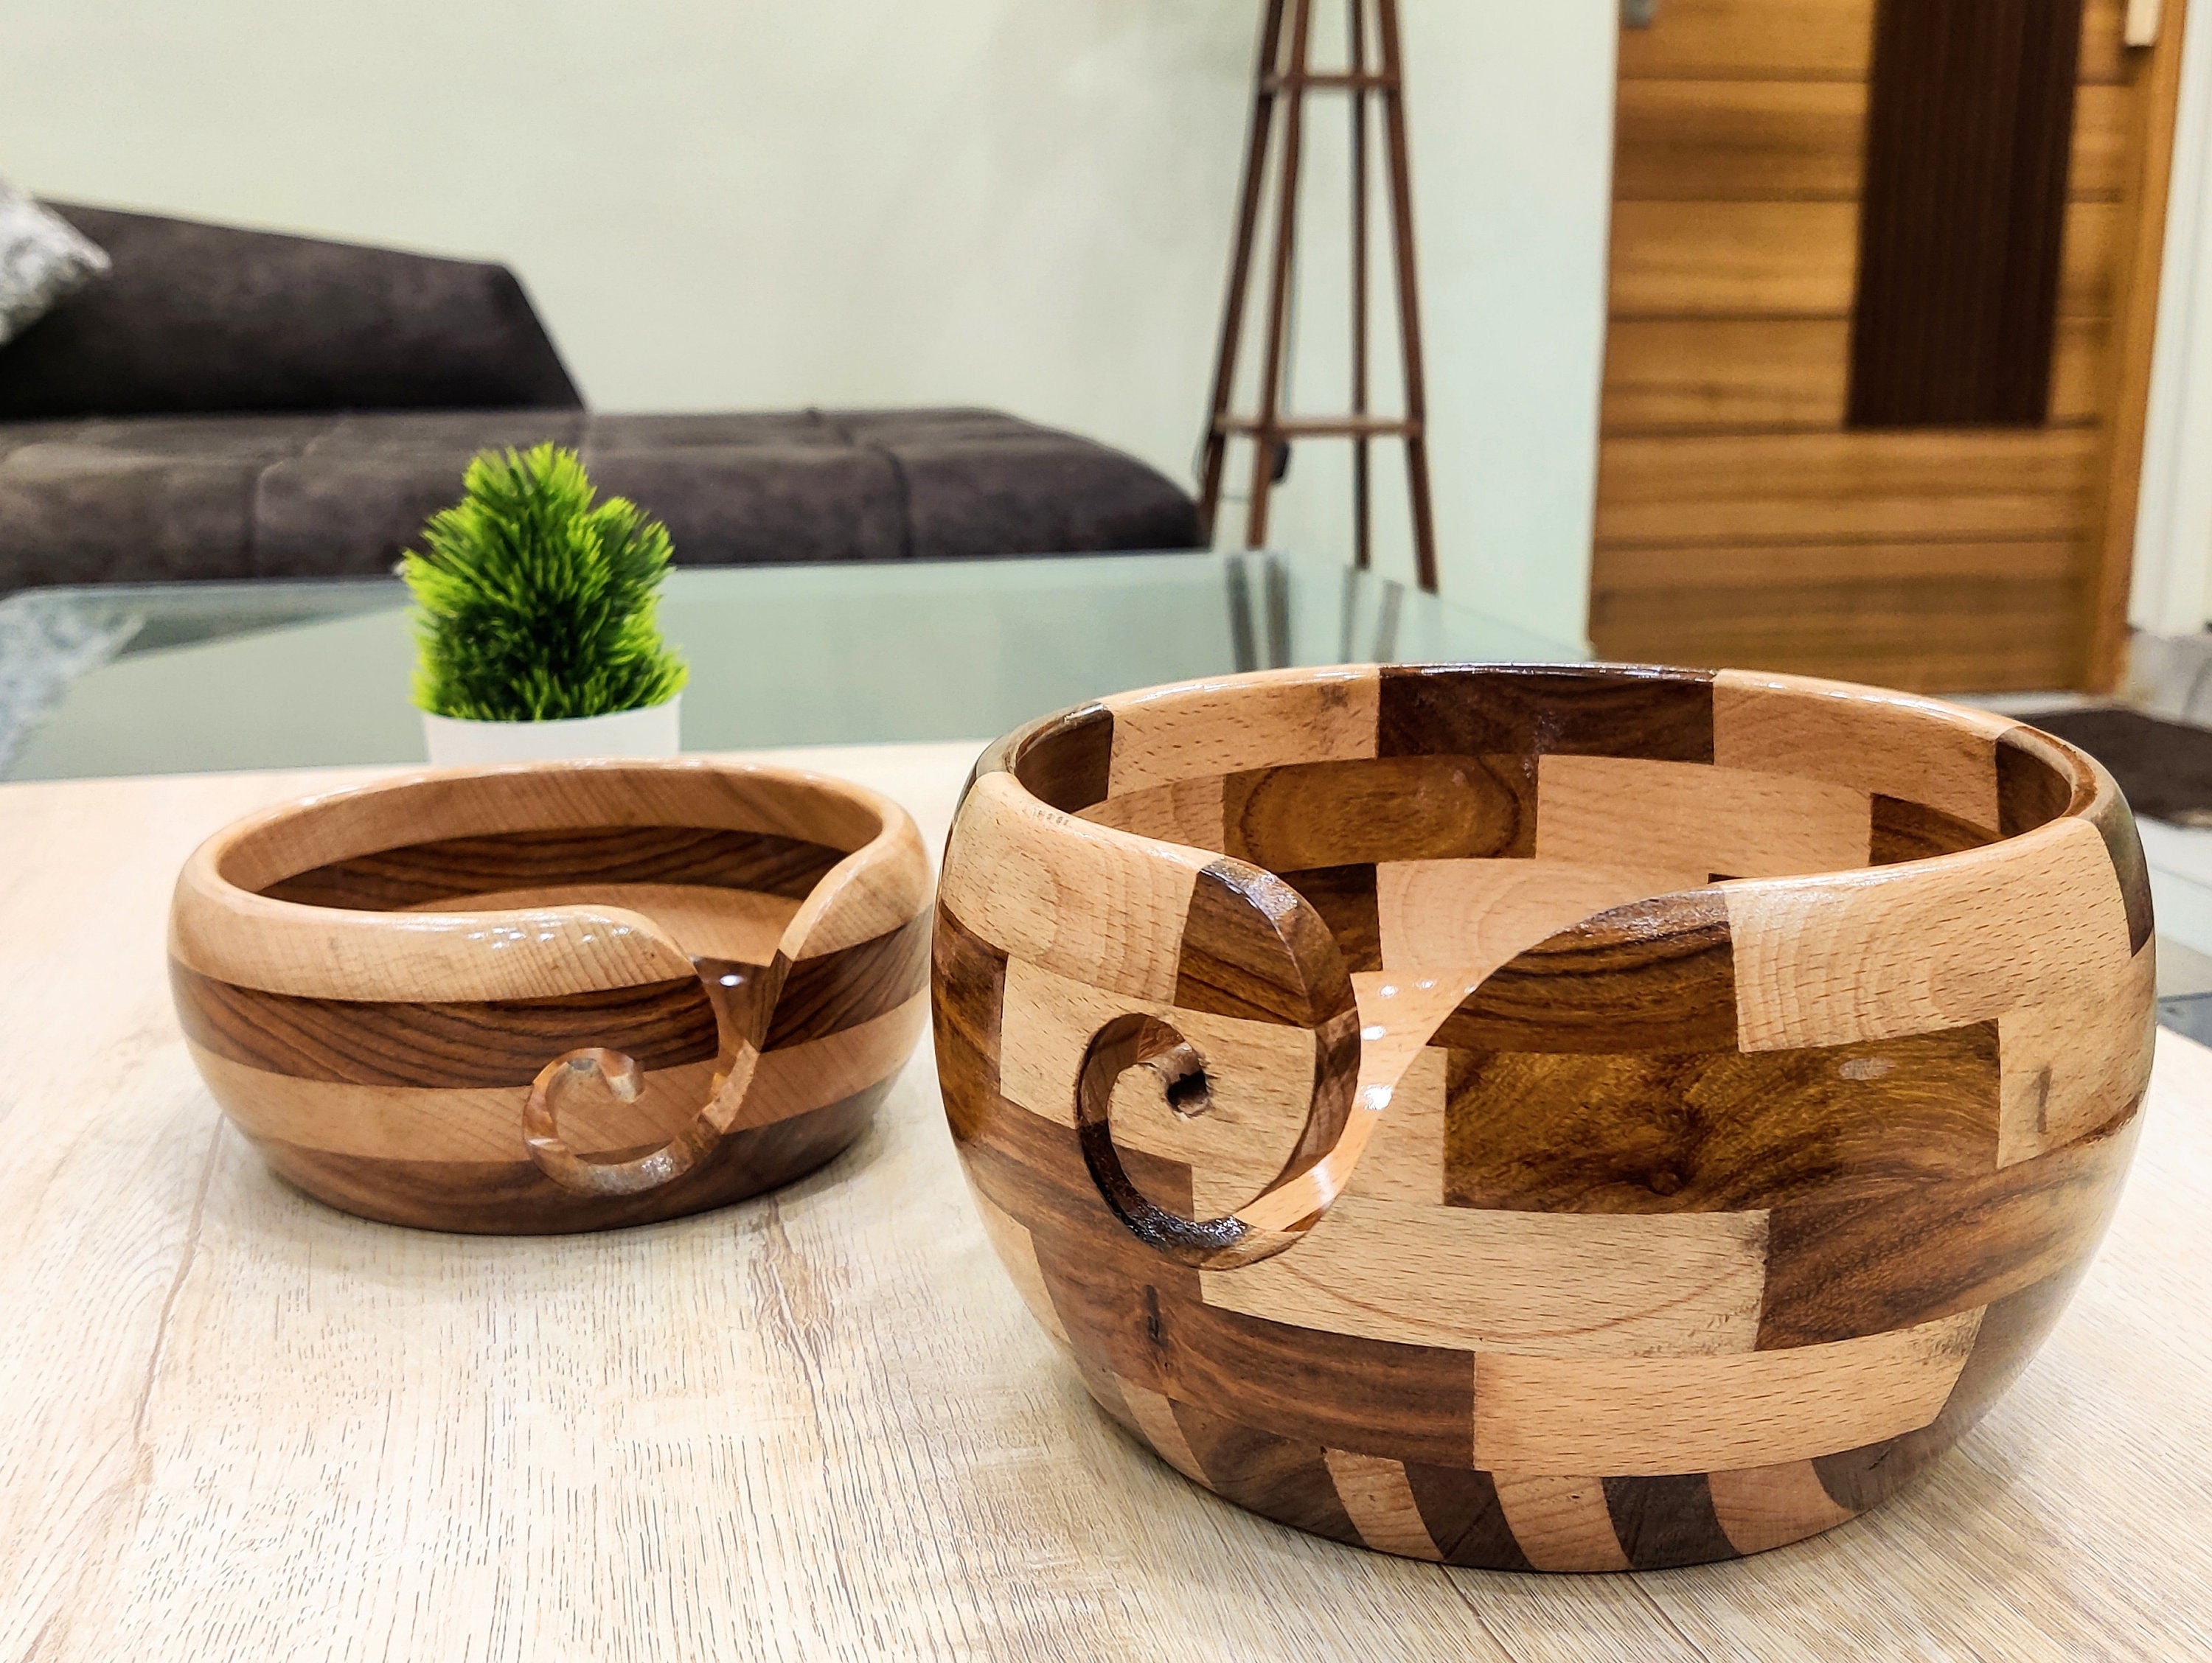 Wooden Yarn Bowl Large Yarn Holder Dispenser With Holes For